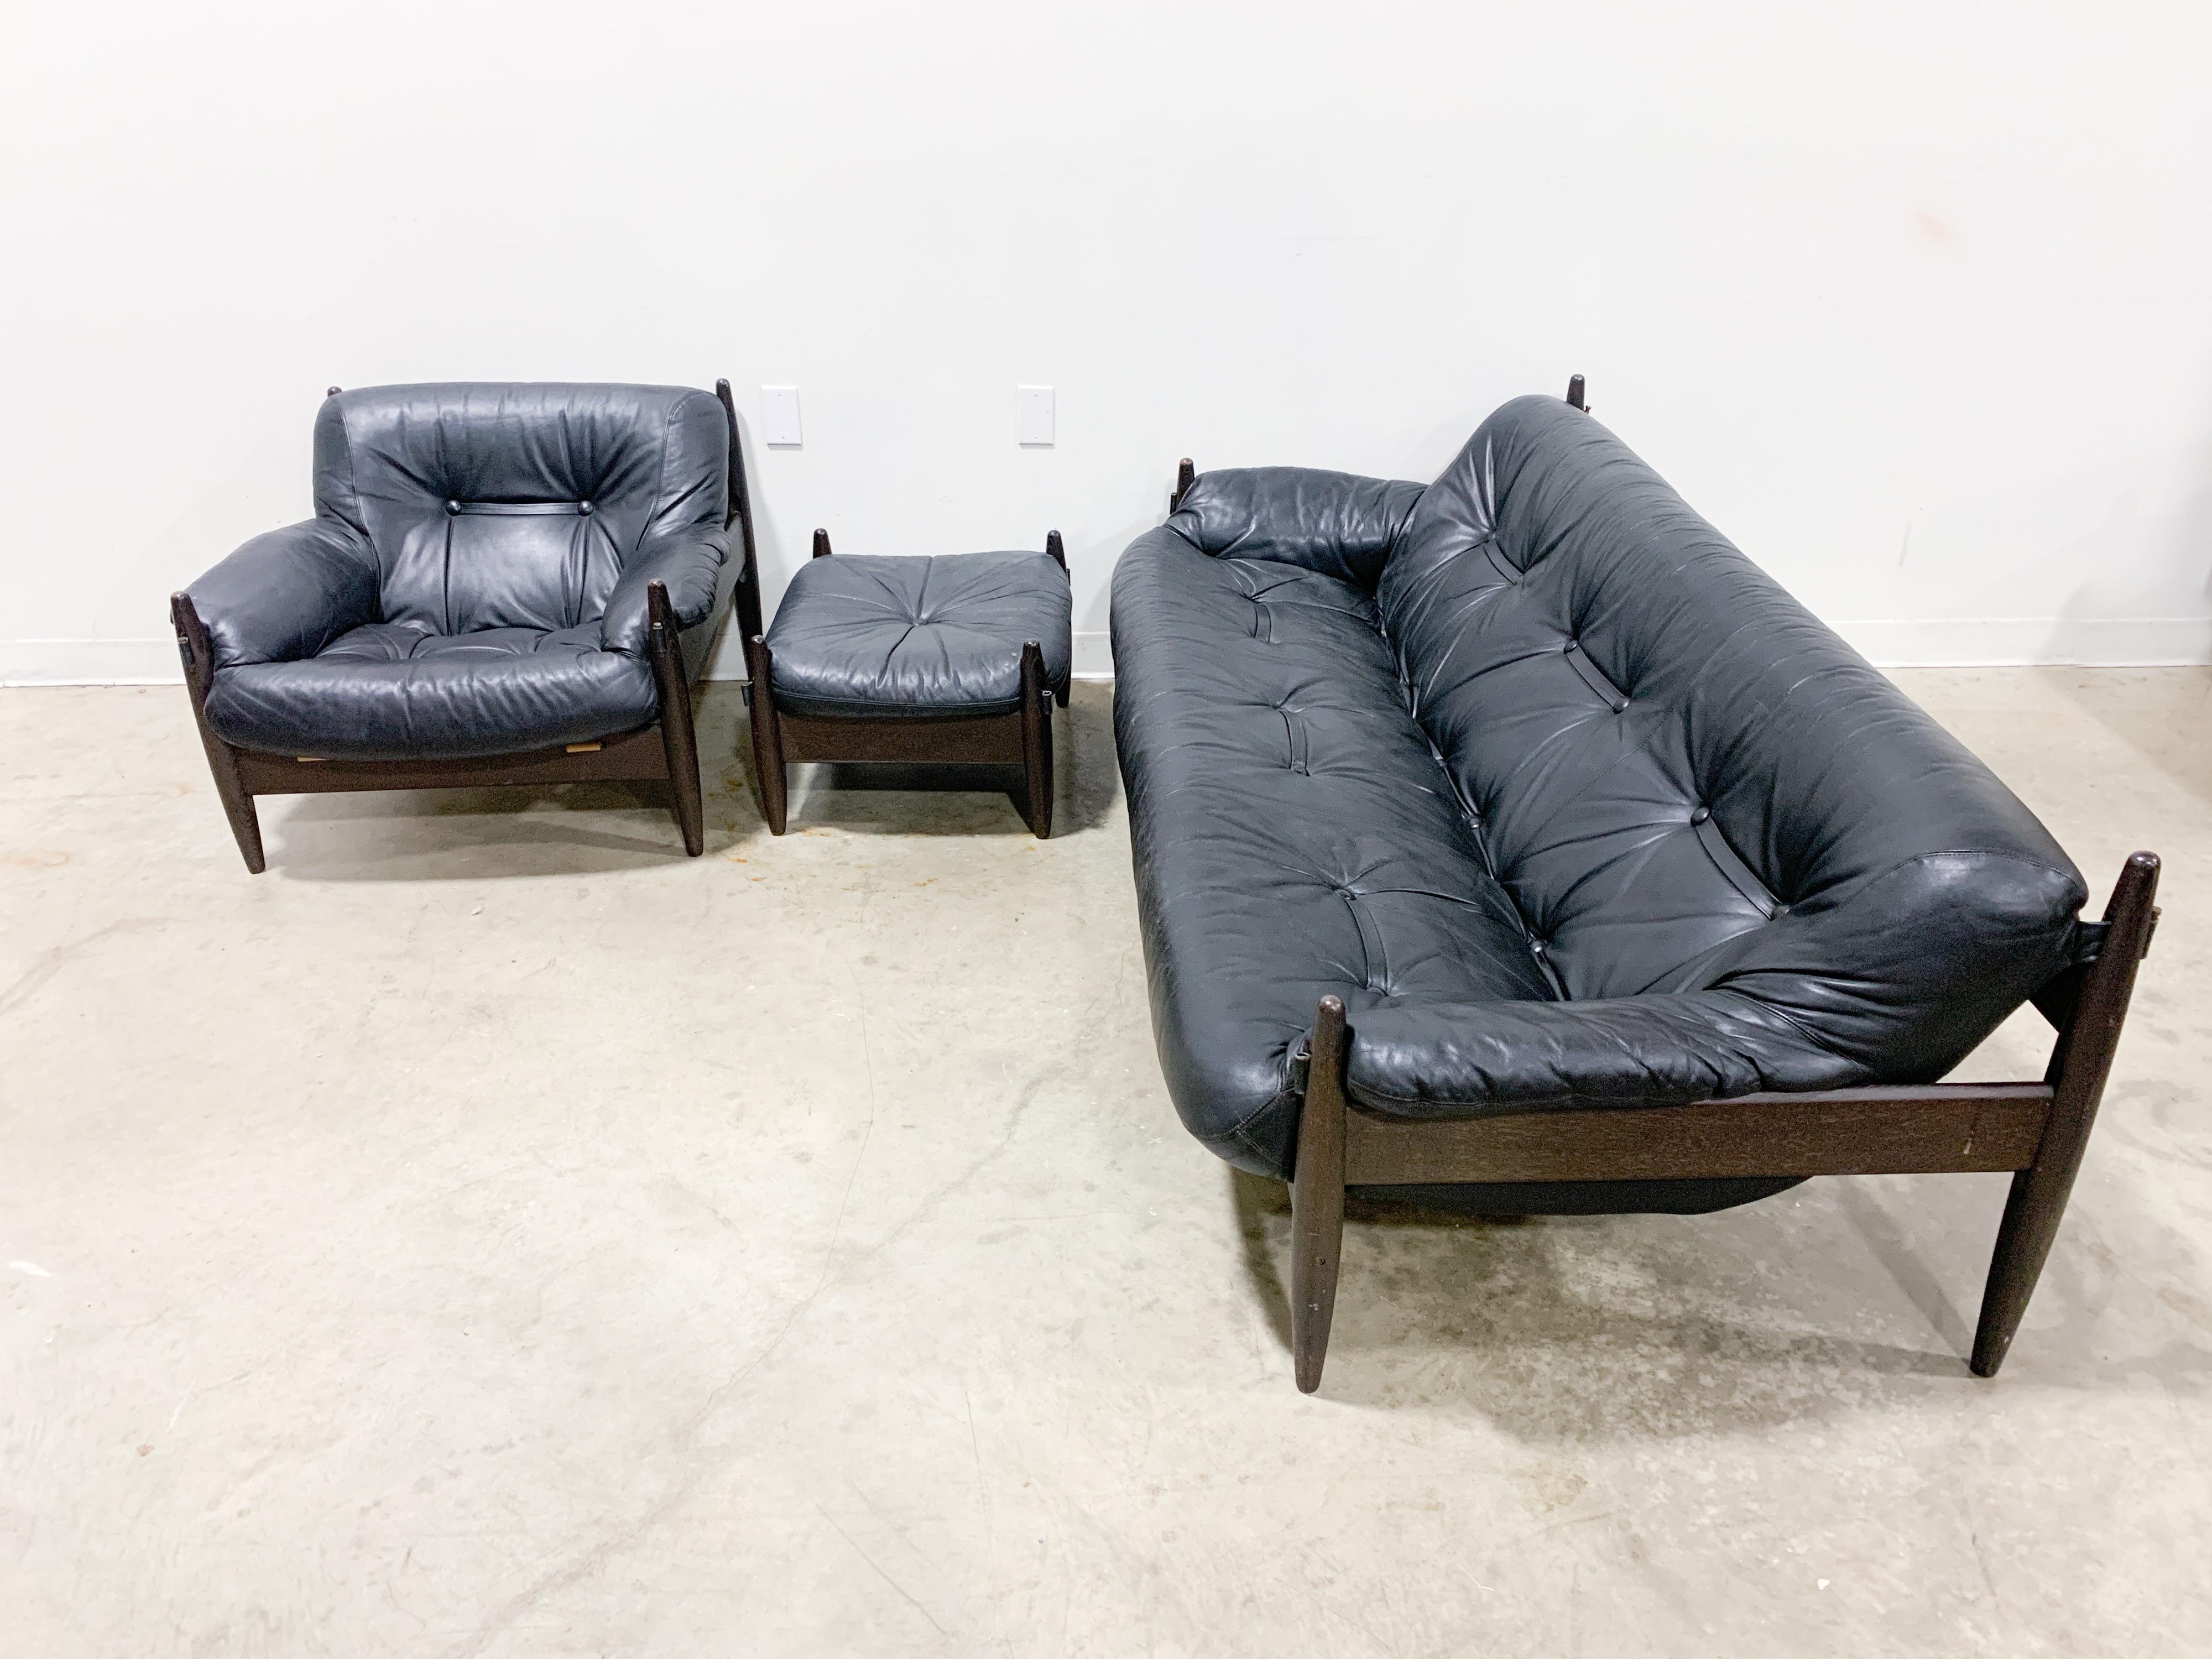 Strikingly beautiful Brazilian modernism style set with ebonized wood frames and genuine leather sling seats in the style of Sergio Rodrigues. Set is in excellent original condition and includes a three-seat sofa, lounge chair, ottoman and slate top